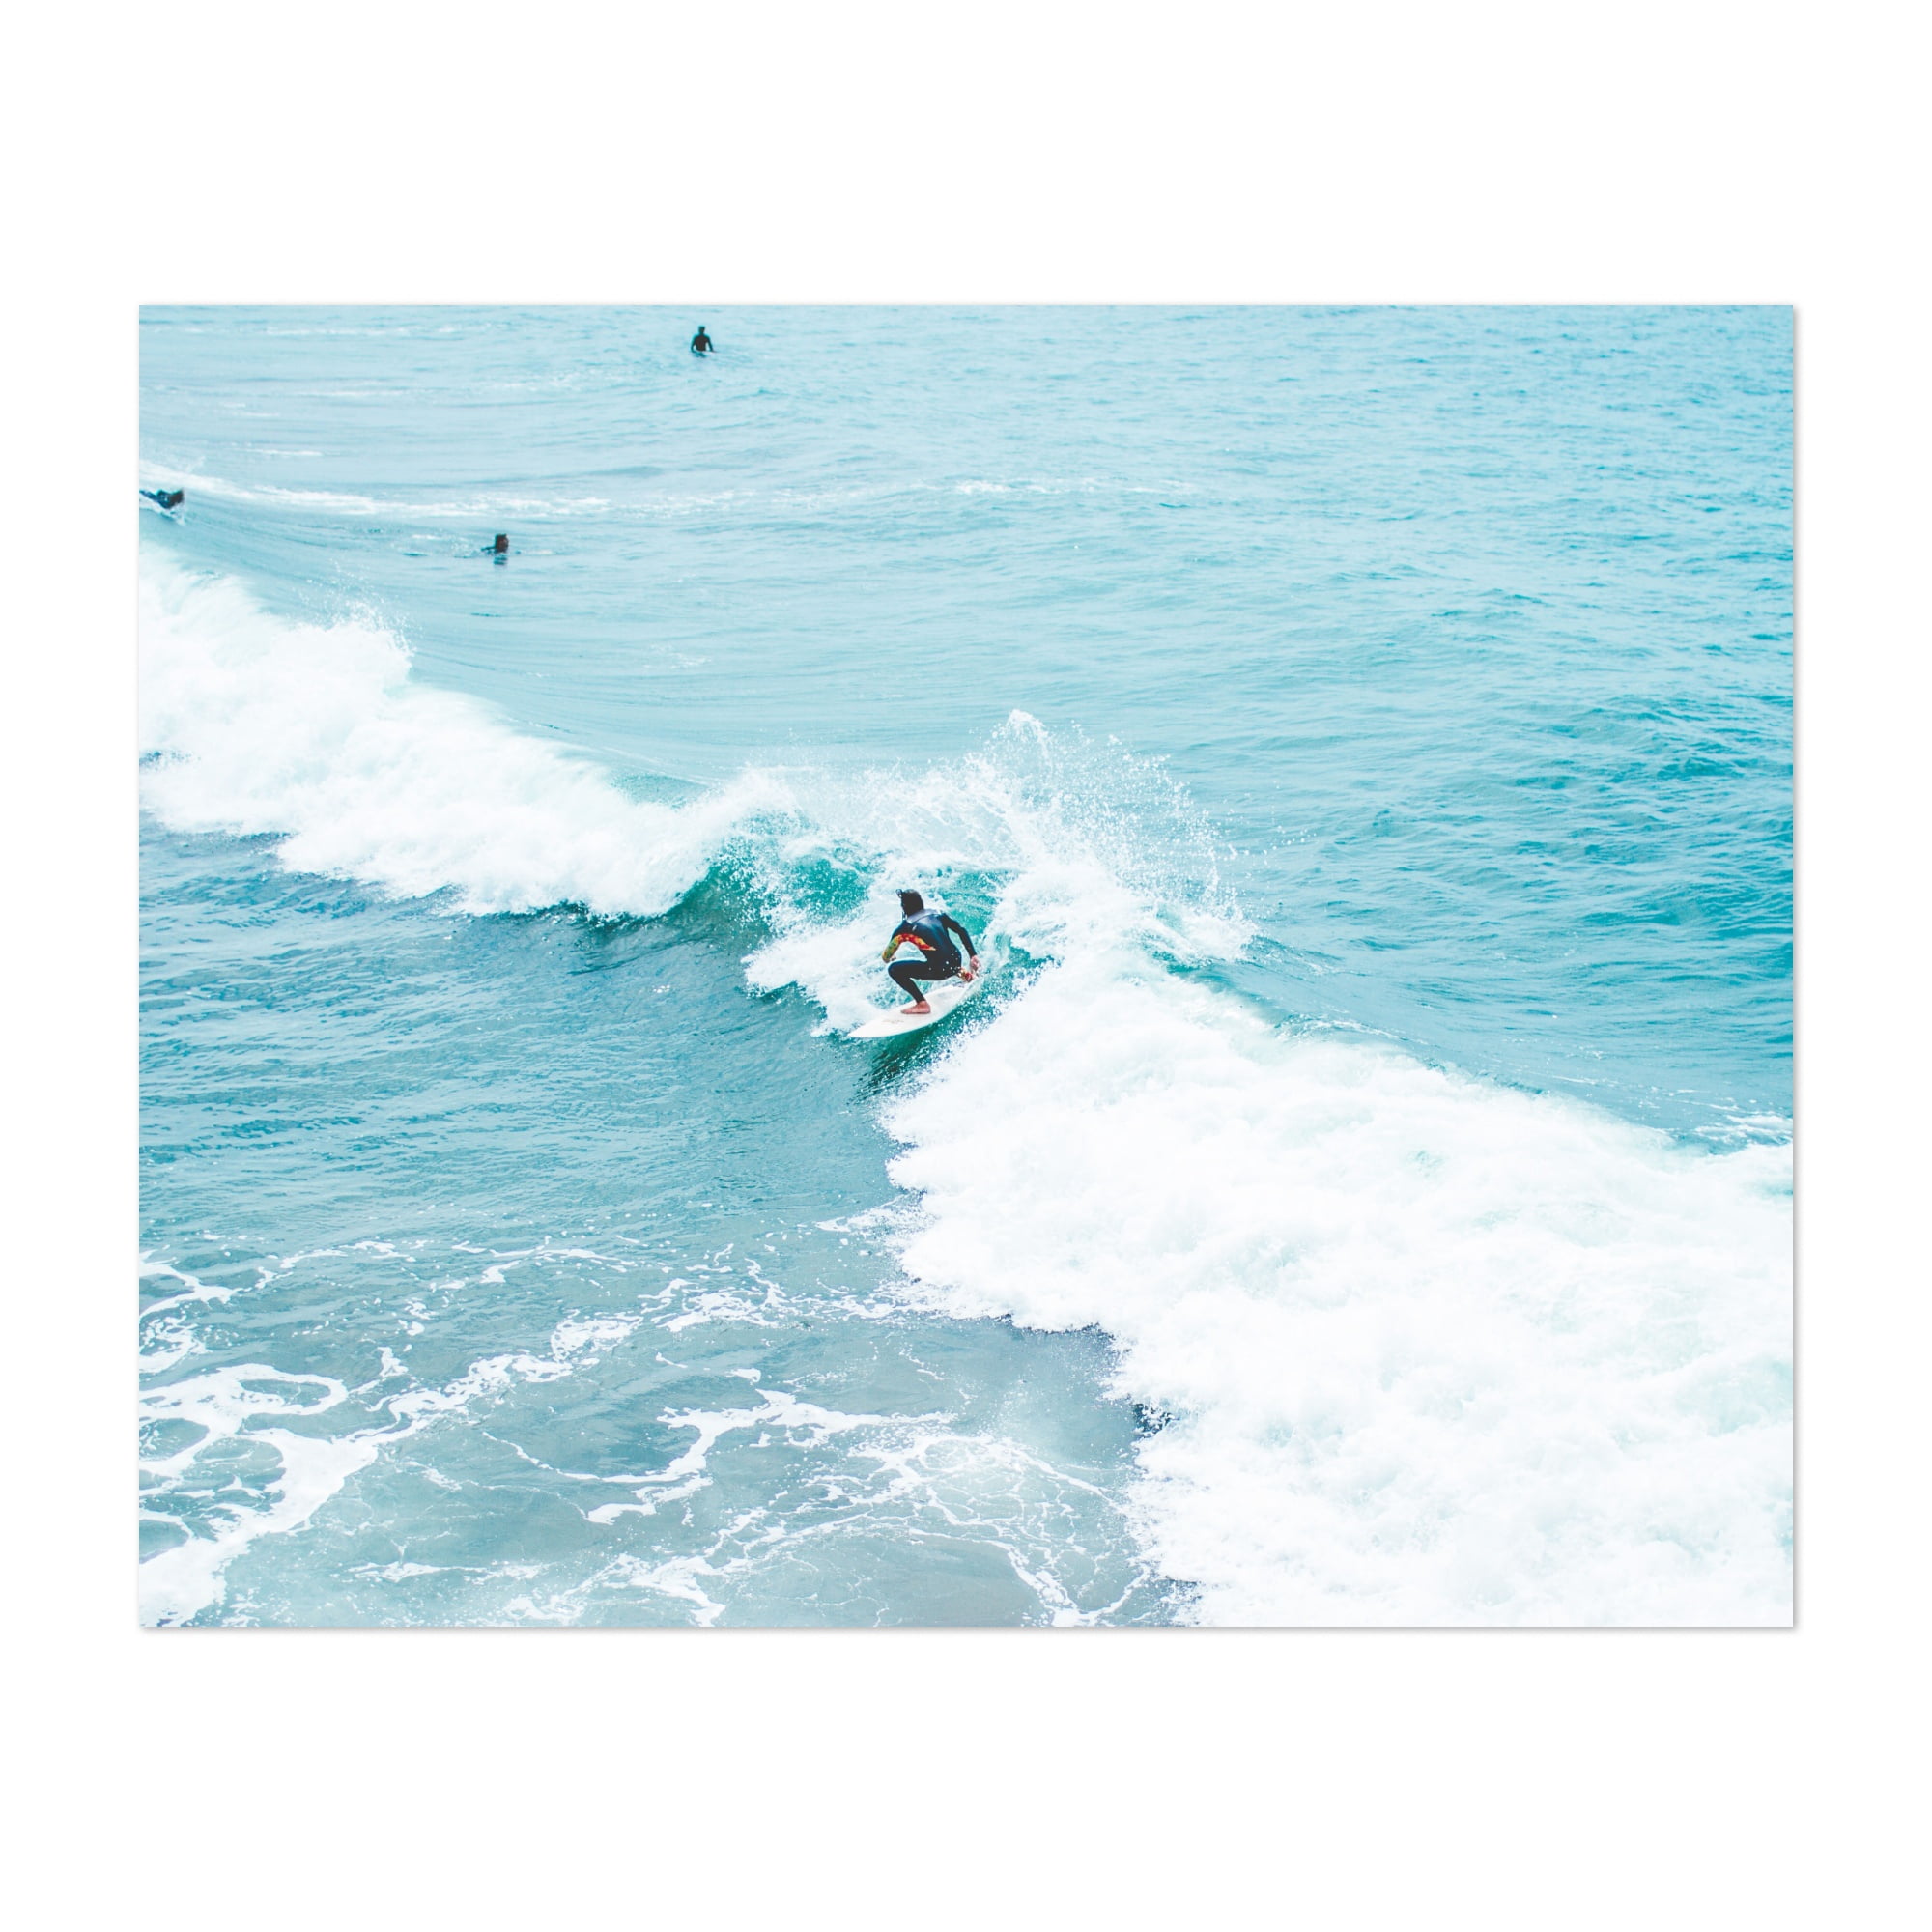 Crashing Wave Surfing Sunset Seascape SINGLE CANVAS WALL ART Picture Print 